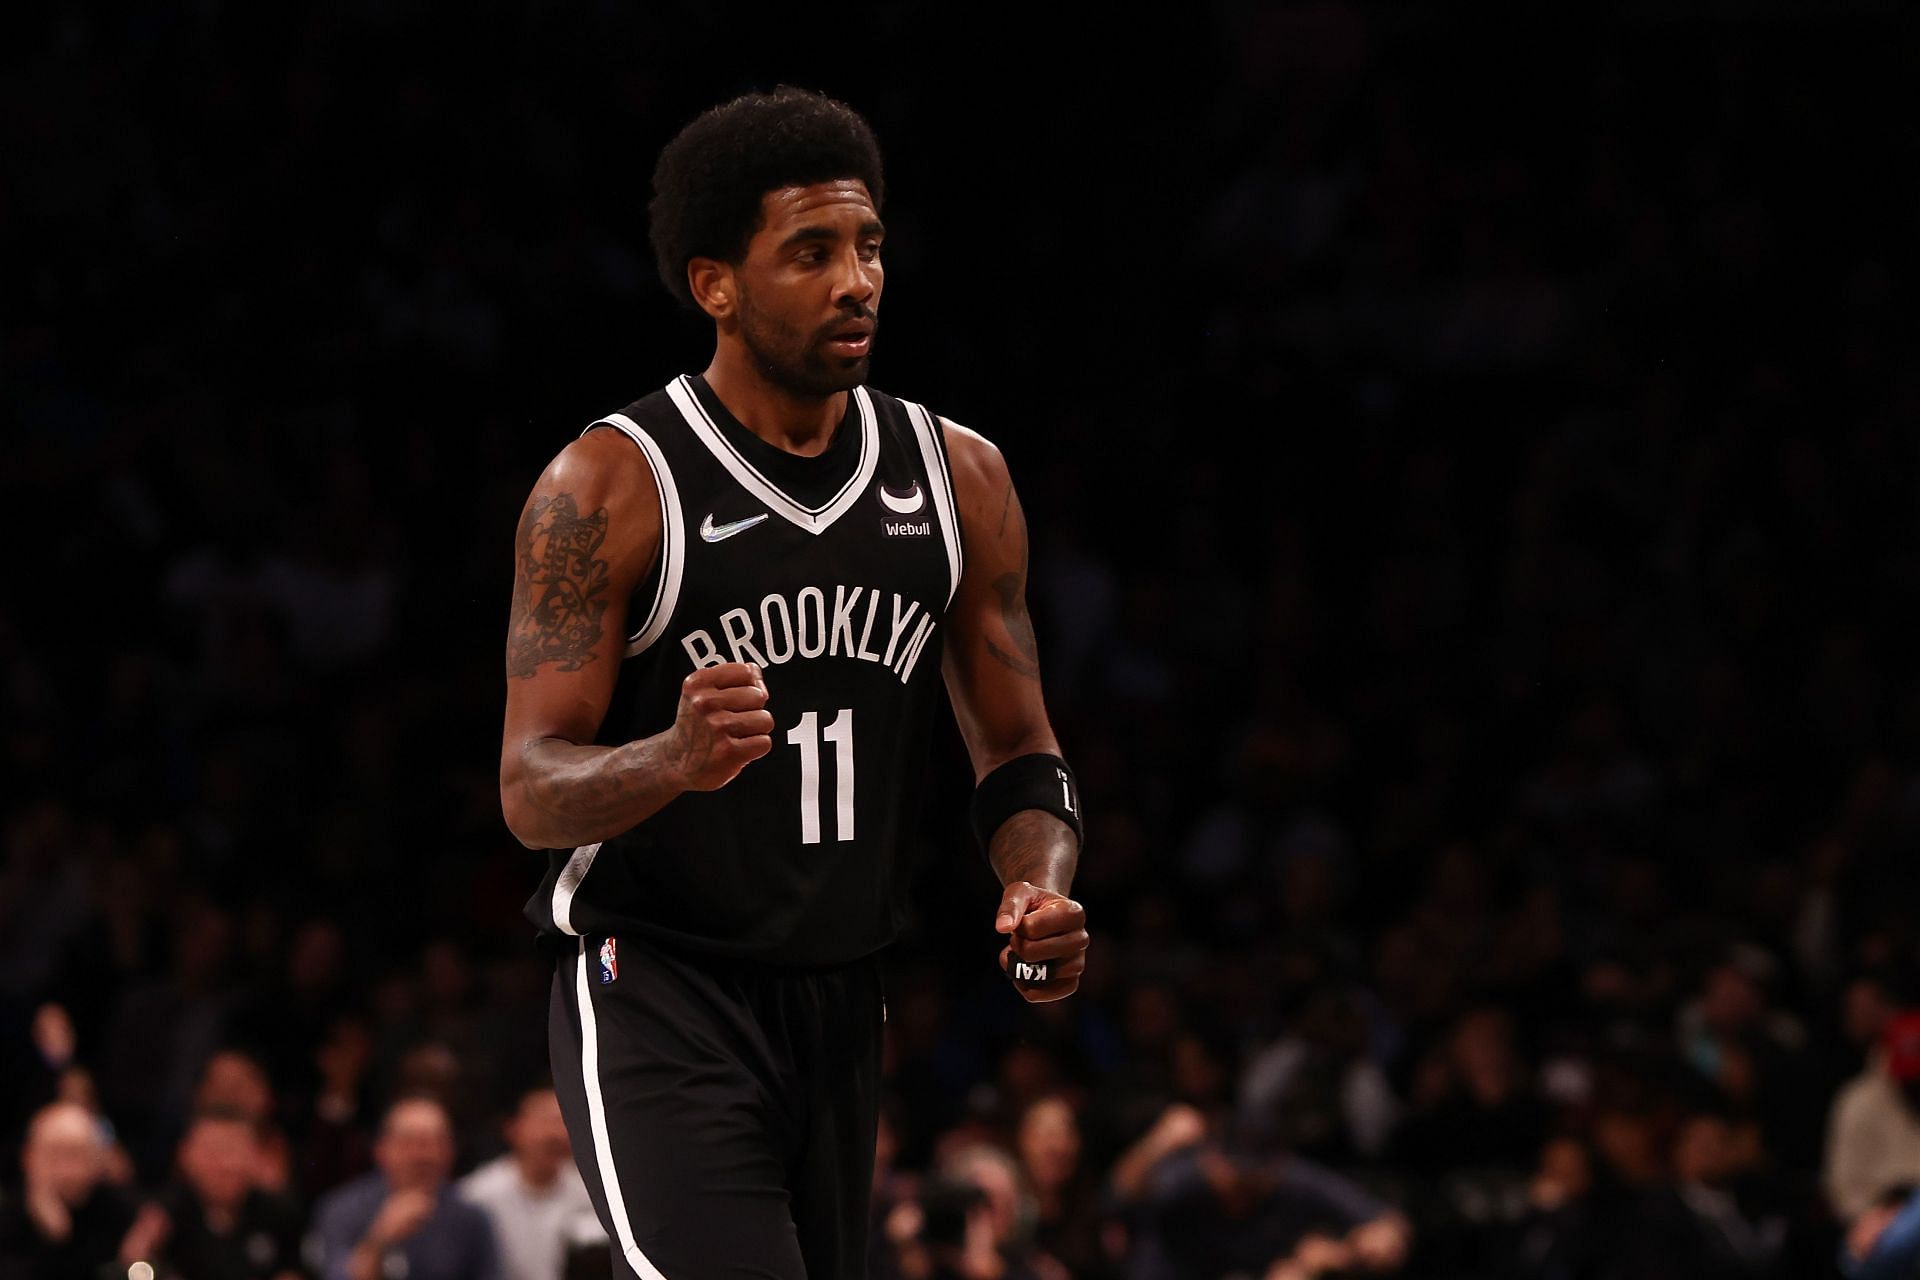 Kyrie Irving of the Brooklyn Nets pumps his fist against the Charlotte Hornets at Barclays Center on Sunday in New York City.